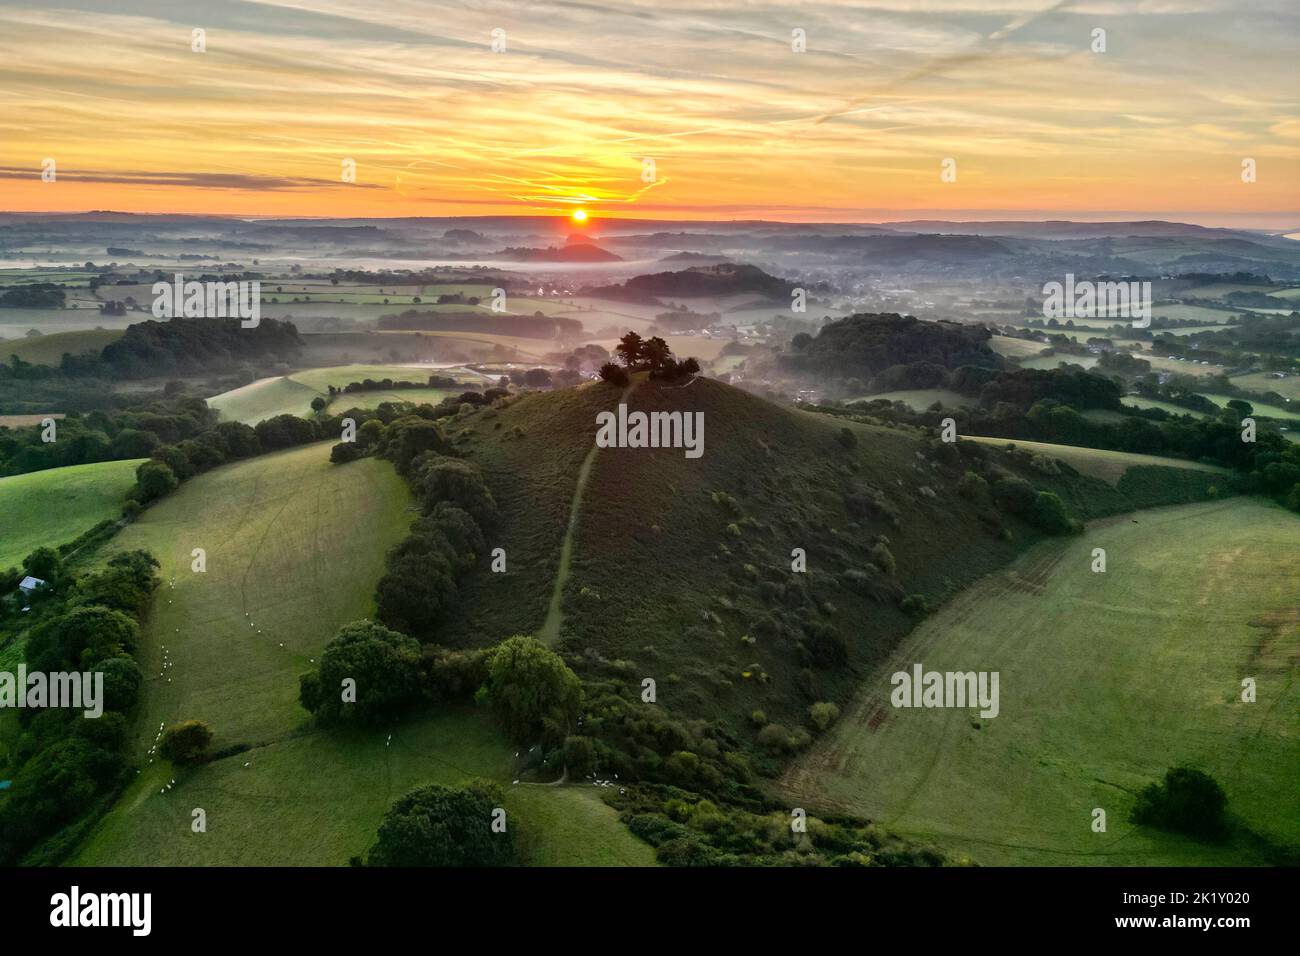 View from the air of the misty sunrise at Colmers Hill at Symondsbury near Bridport in Dorset. Picture Credit: Graham Hunt/Alamy Stock Photo